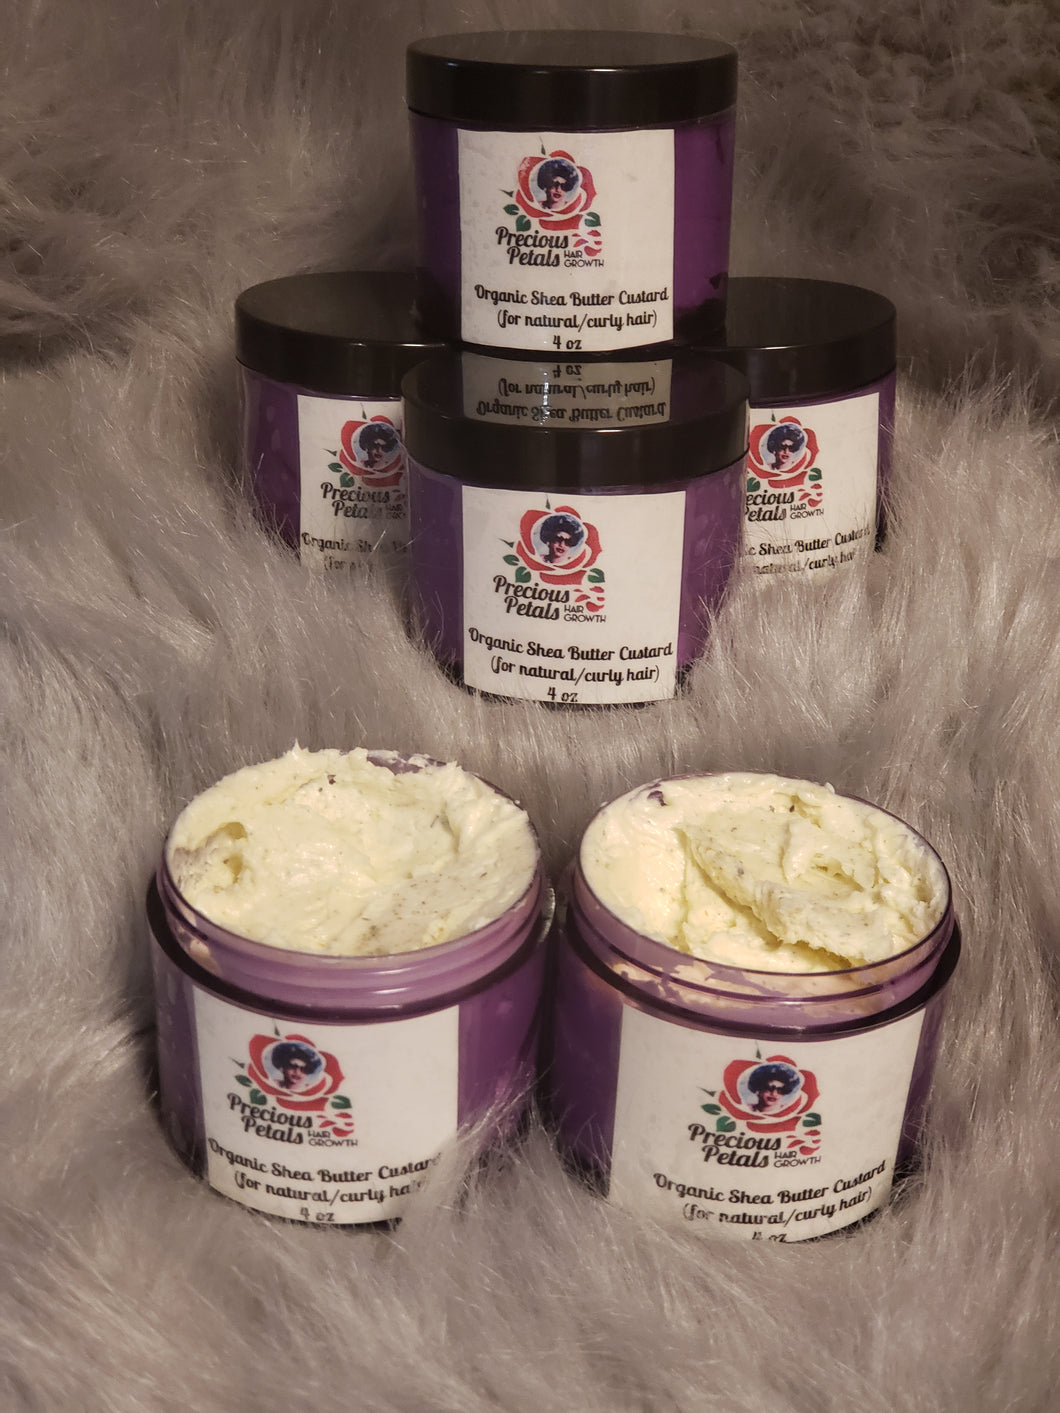 HAIR***Organic Shea Butter Custard (for natural/curly hair) 4 oz/ special order for 8 oz